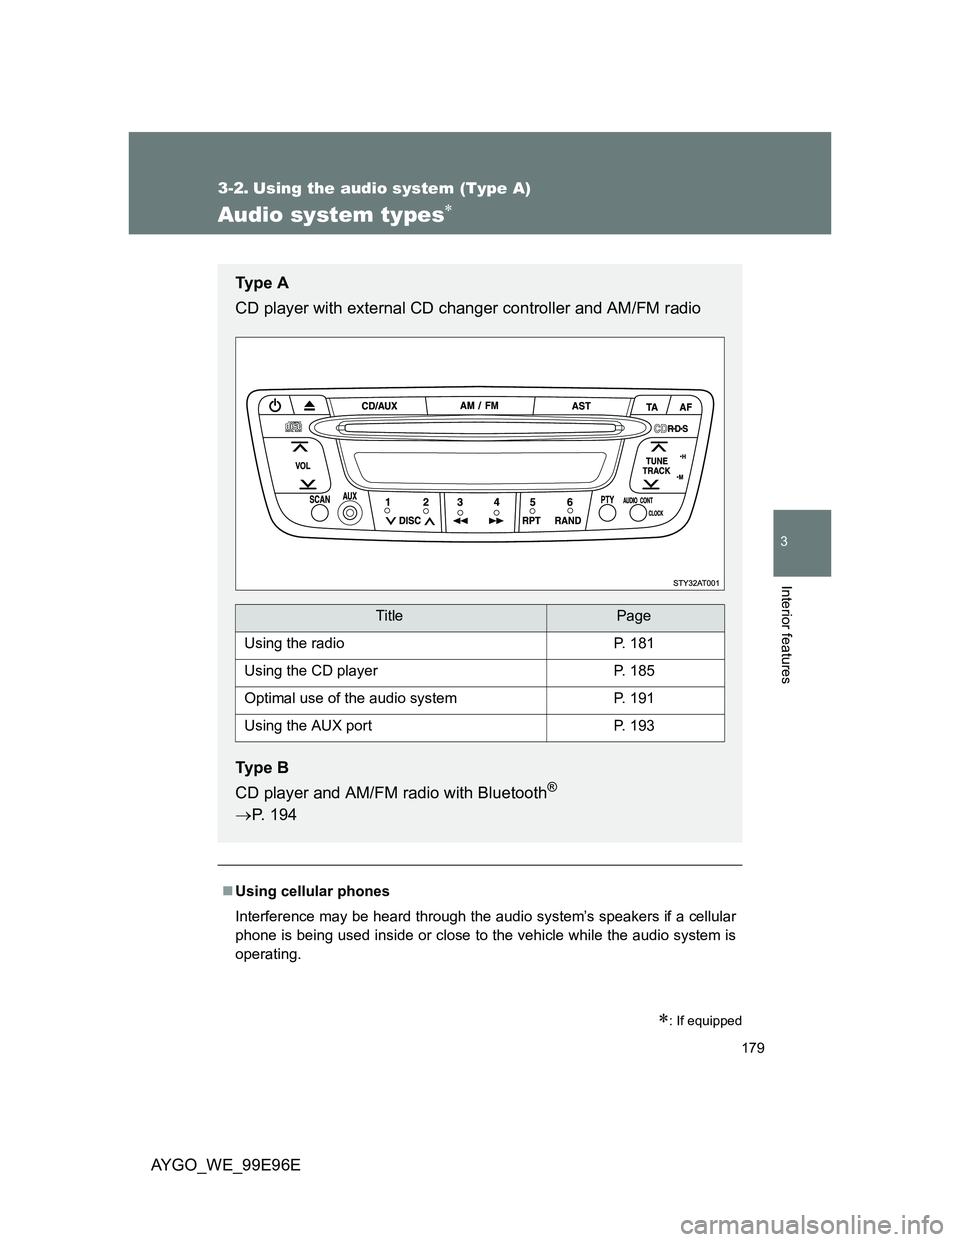 TOYOTA AYGO 2012  Owners Manual (in English) 179
3
Interior features
AYGO_WE_99E96E
3-2. Using the audio system (Type A)
Audio system types
: If equipped
Using cellular phones
Interference may be heard through the audio system’s speak